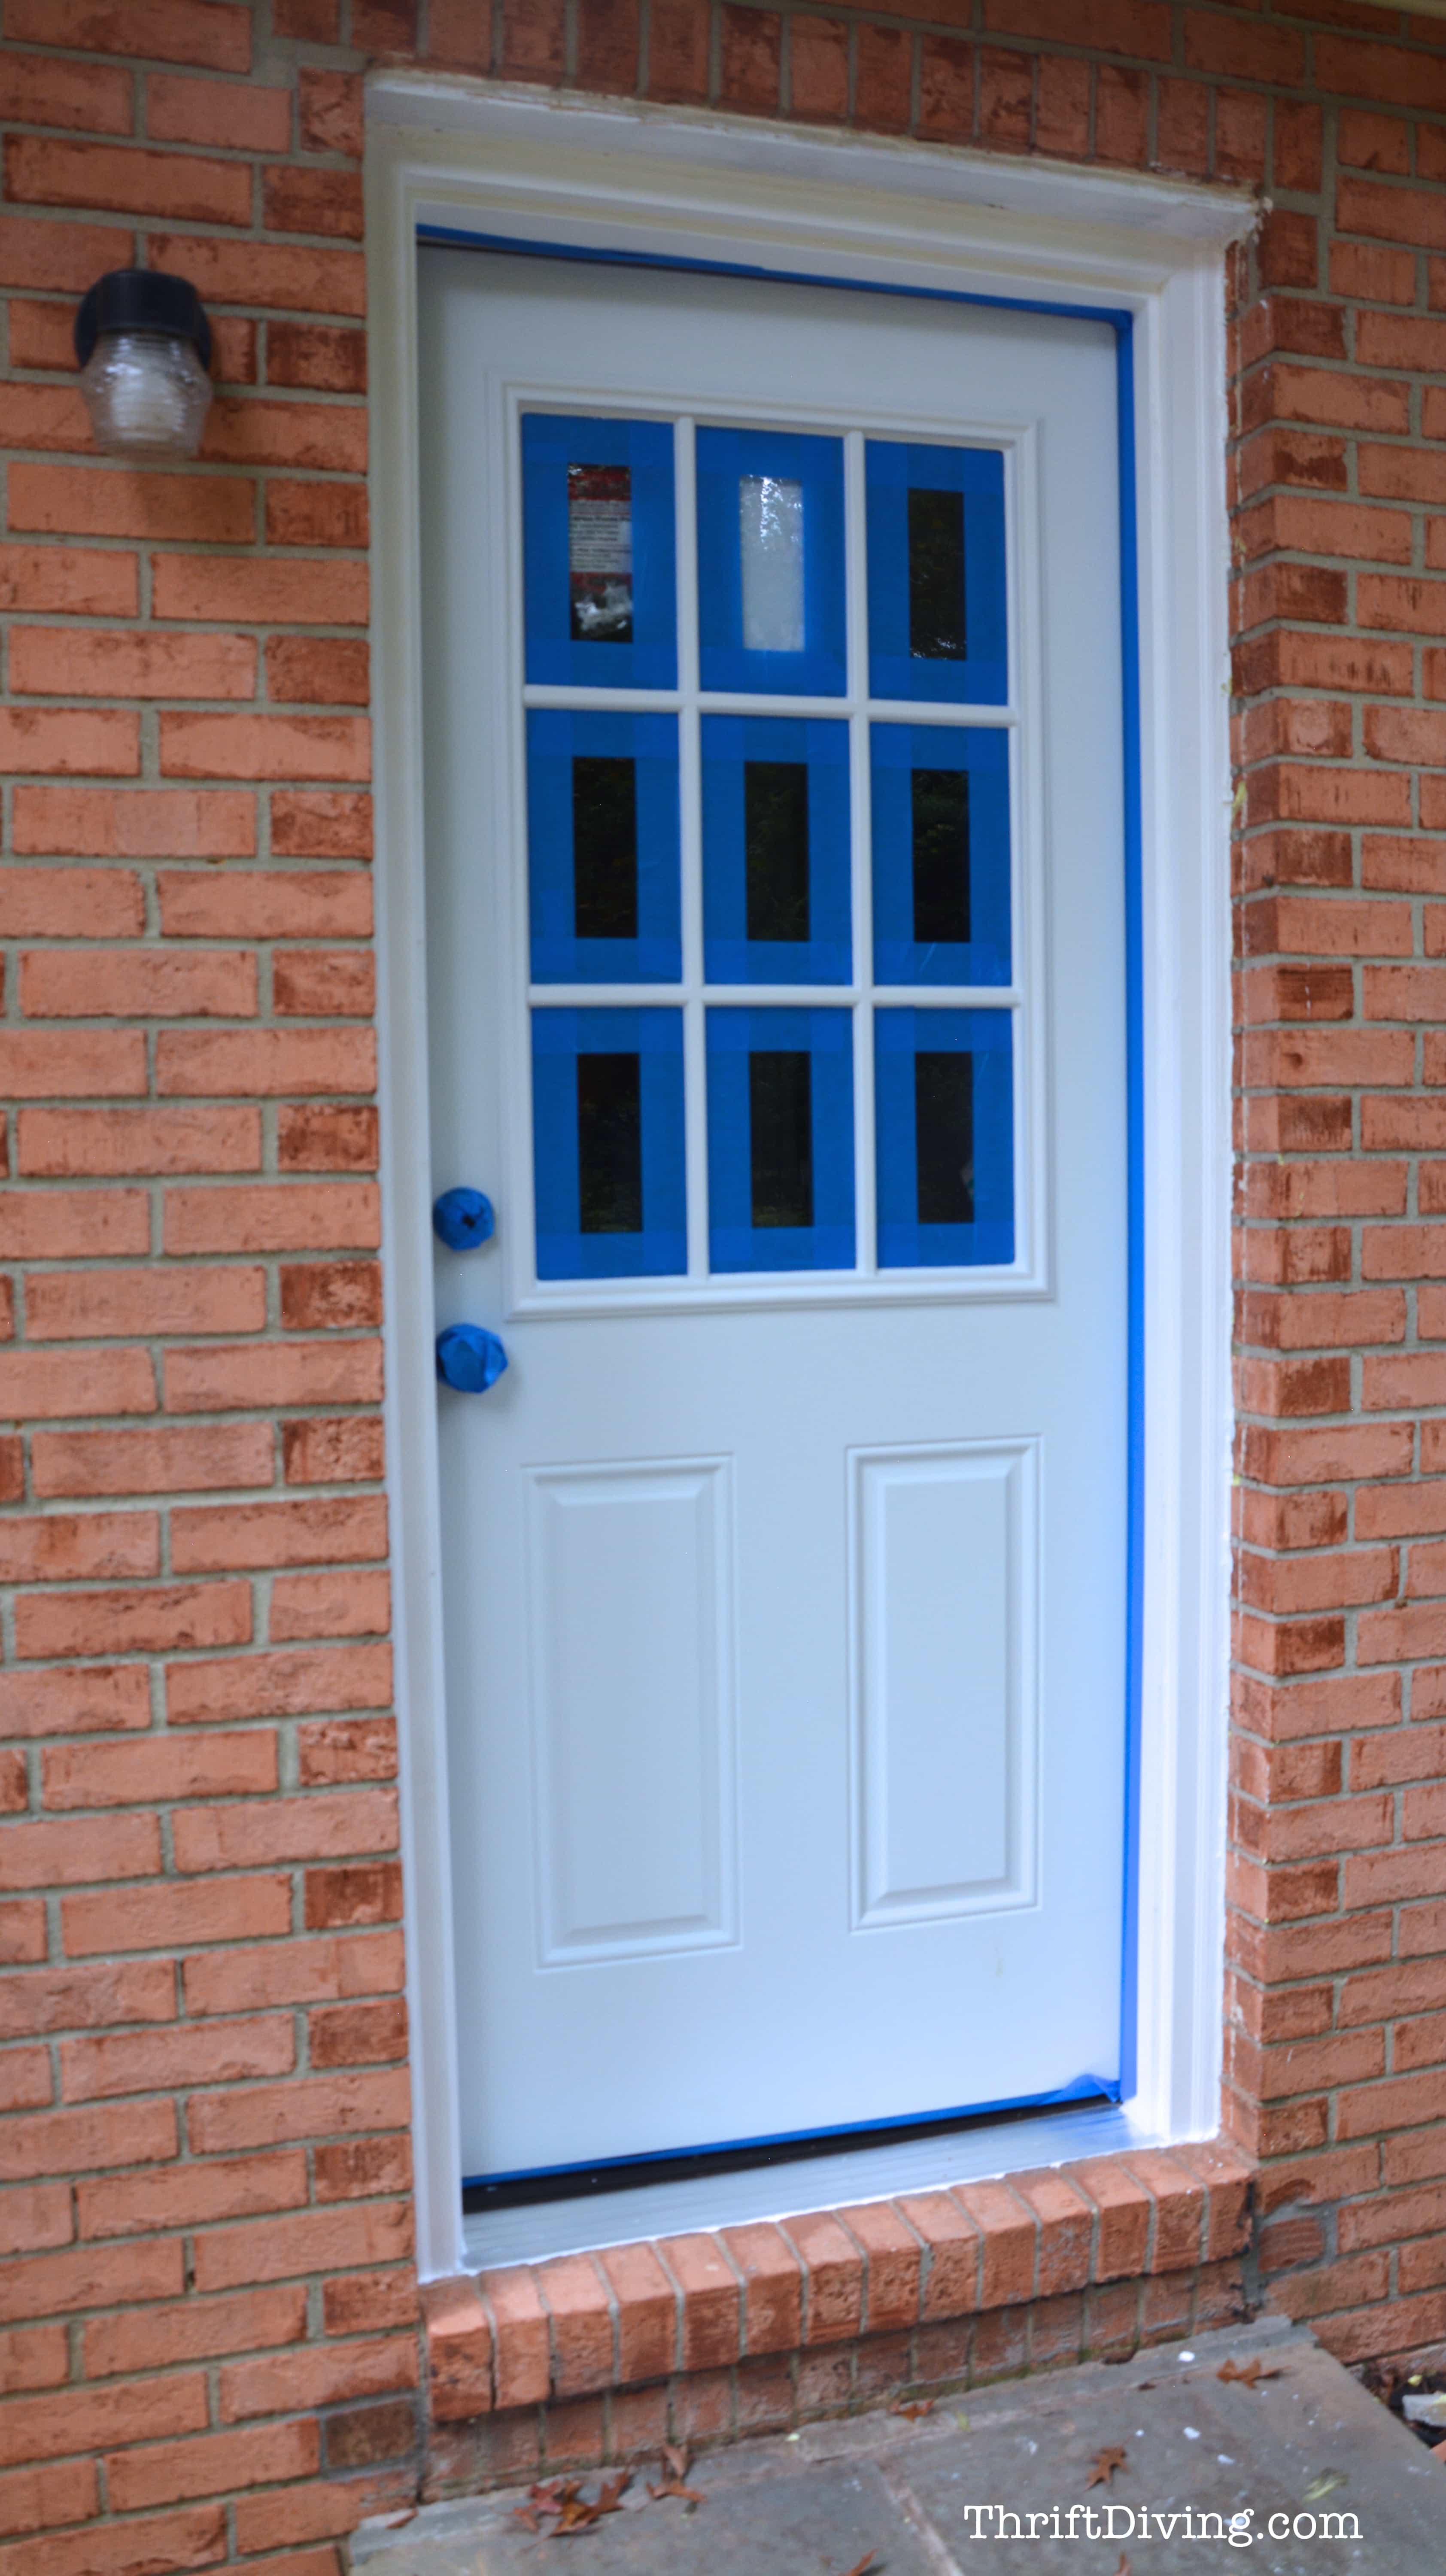 How to Paint and Stencil a Door - Step 2 - Tape off the door - ThriftDiving